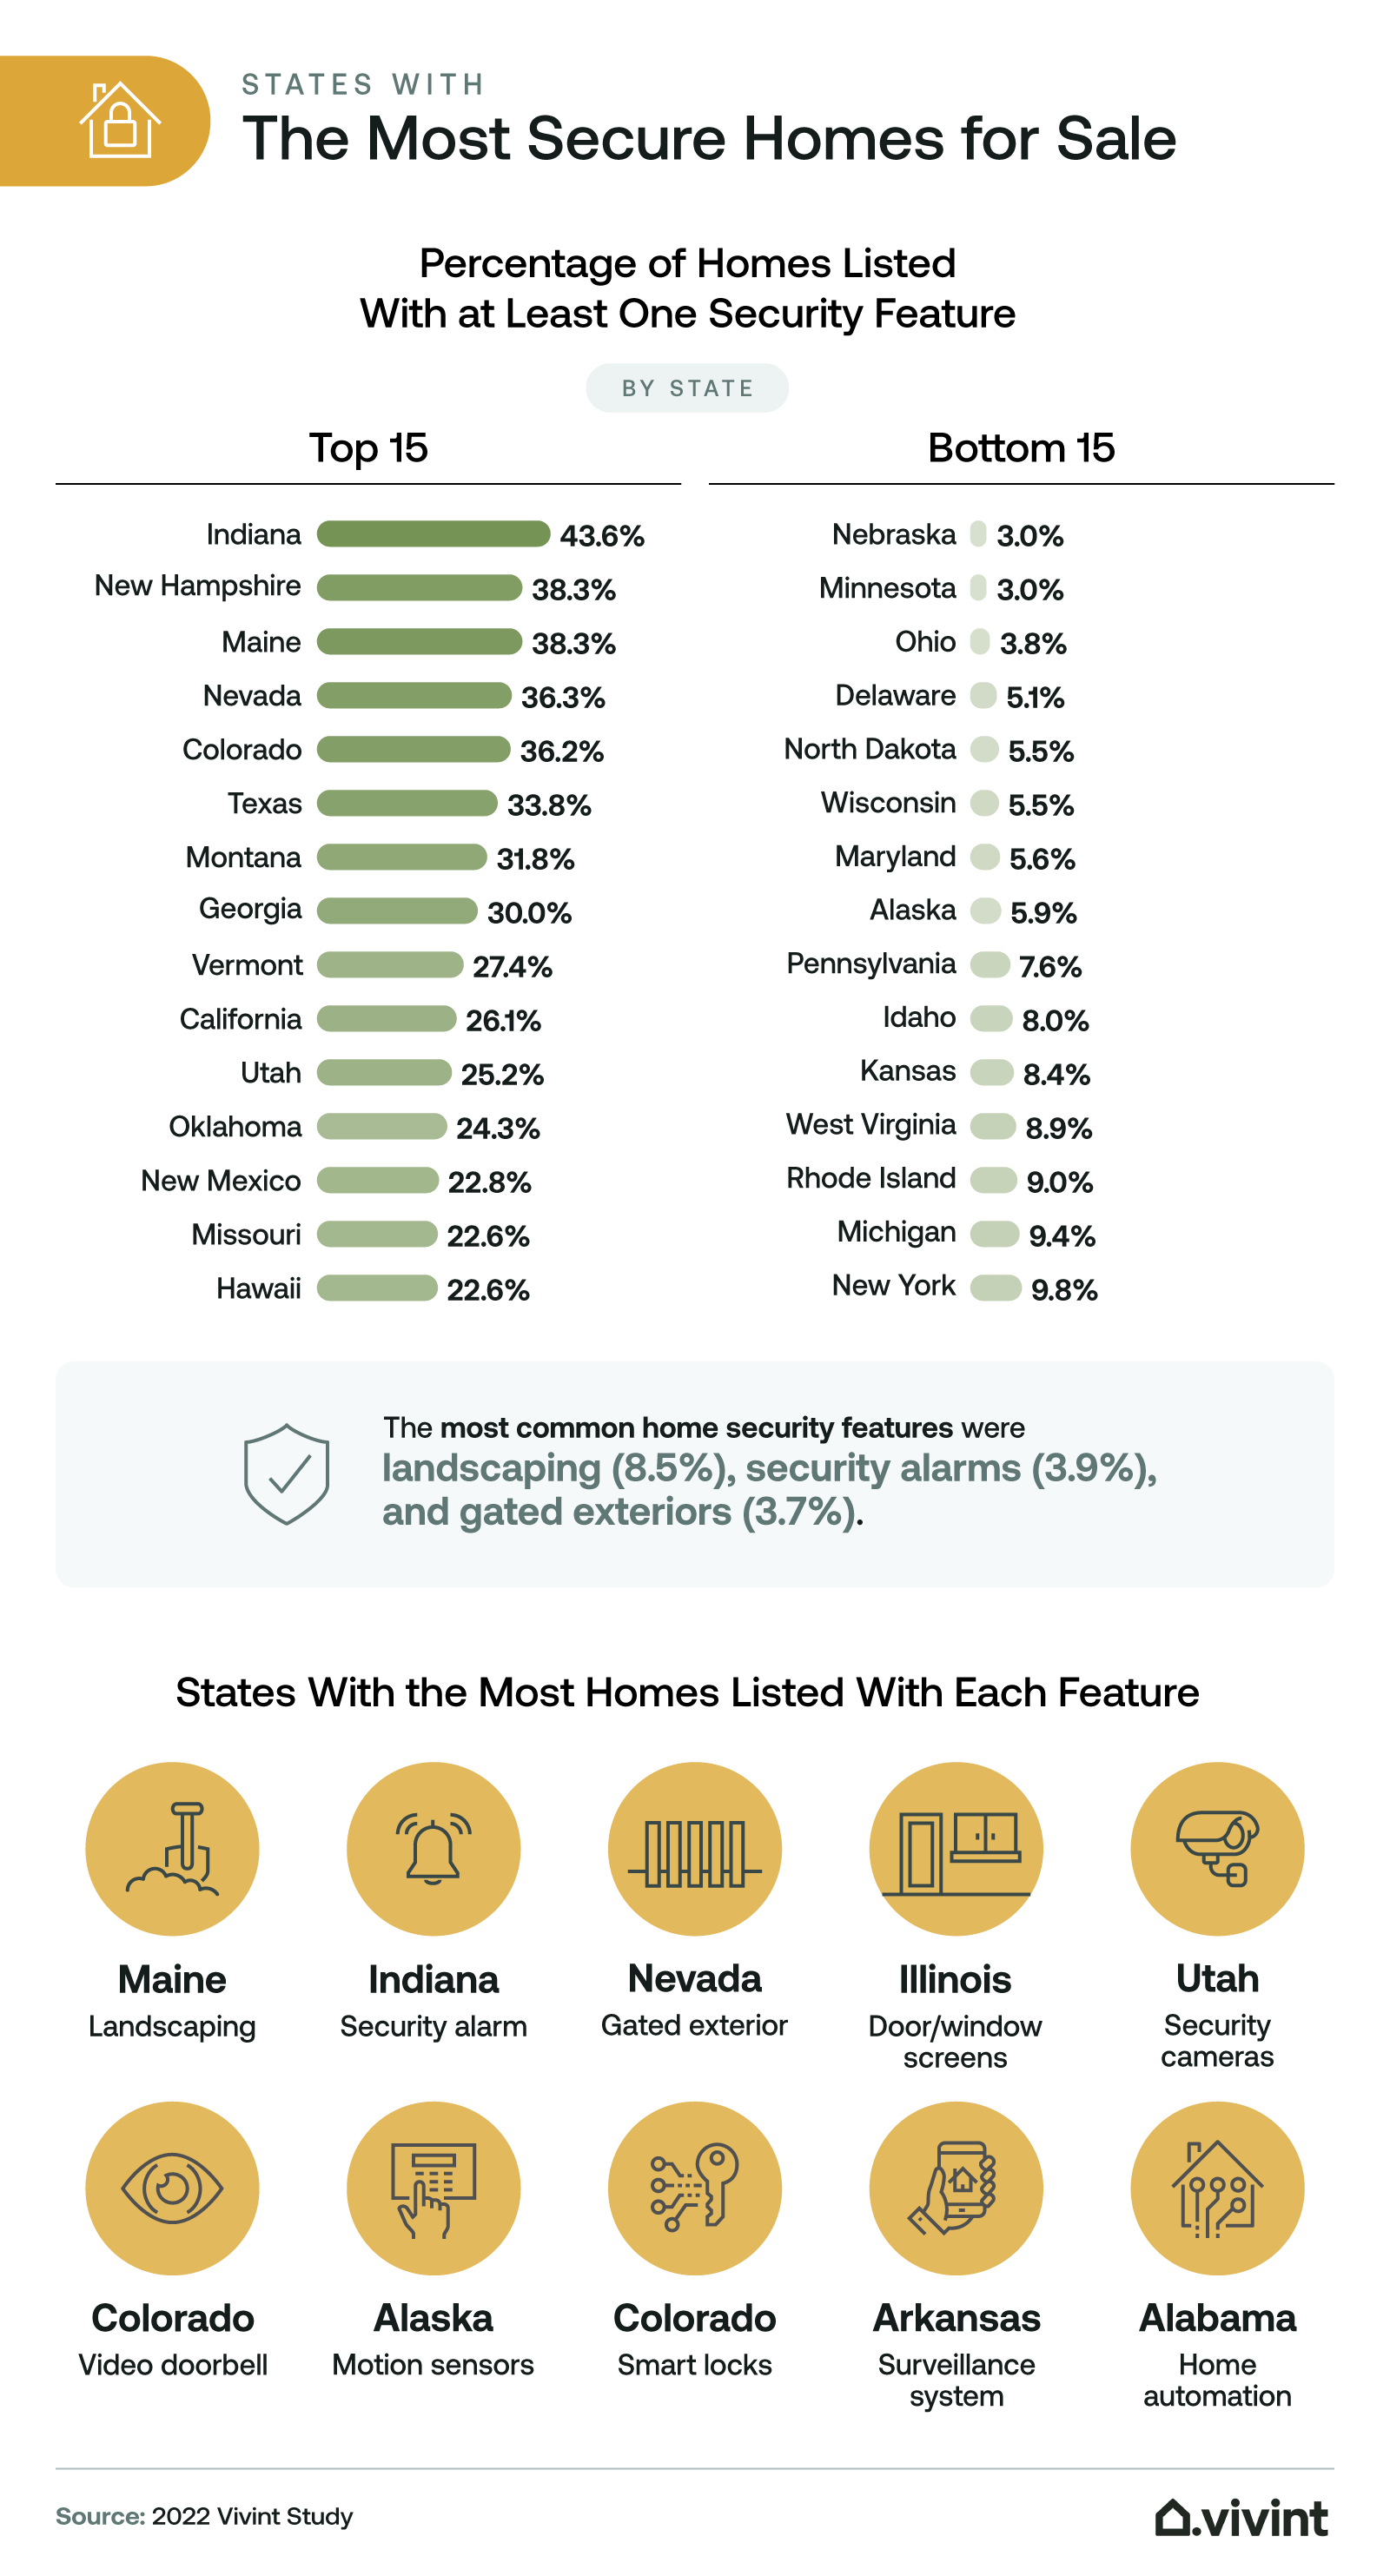 Information about which states have the most secure homes for sale.